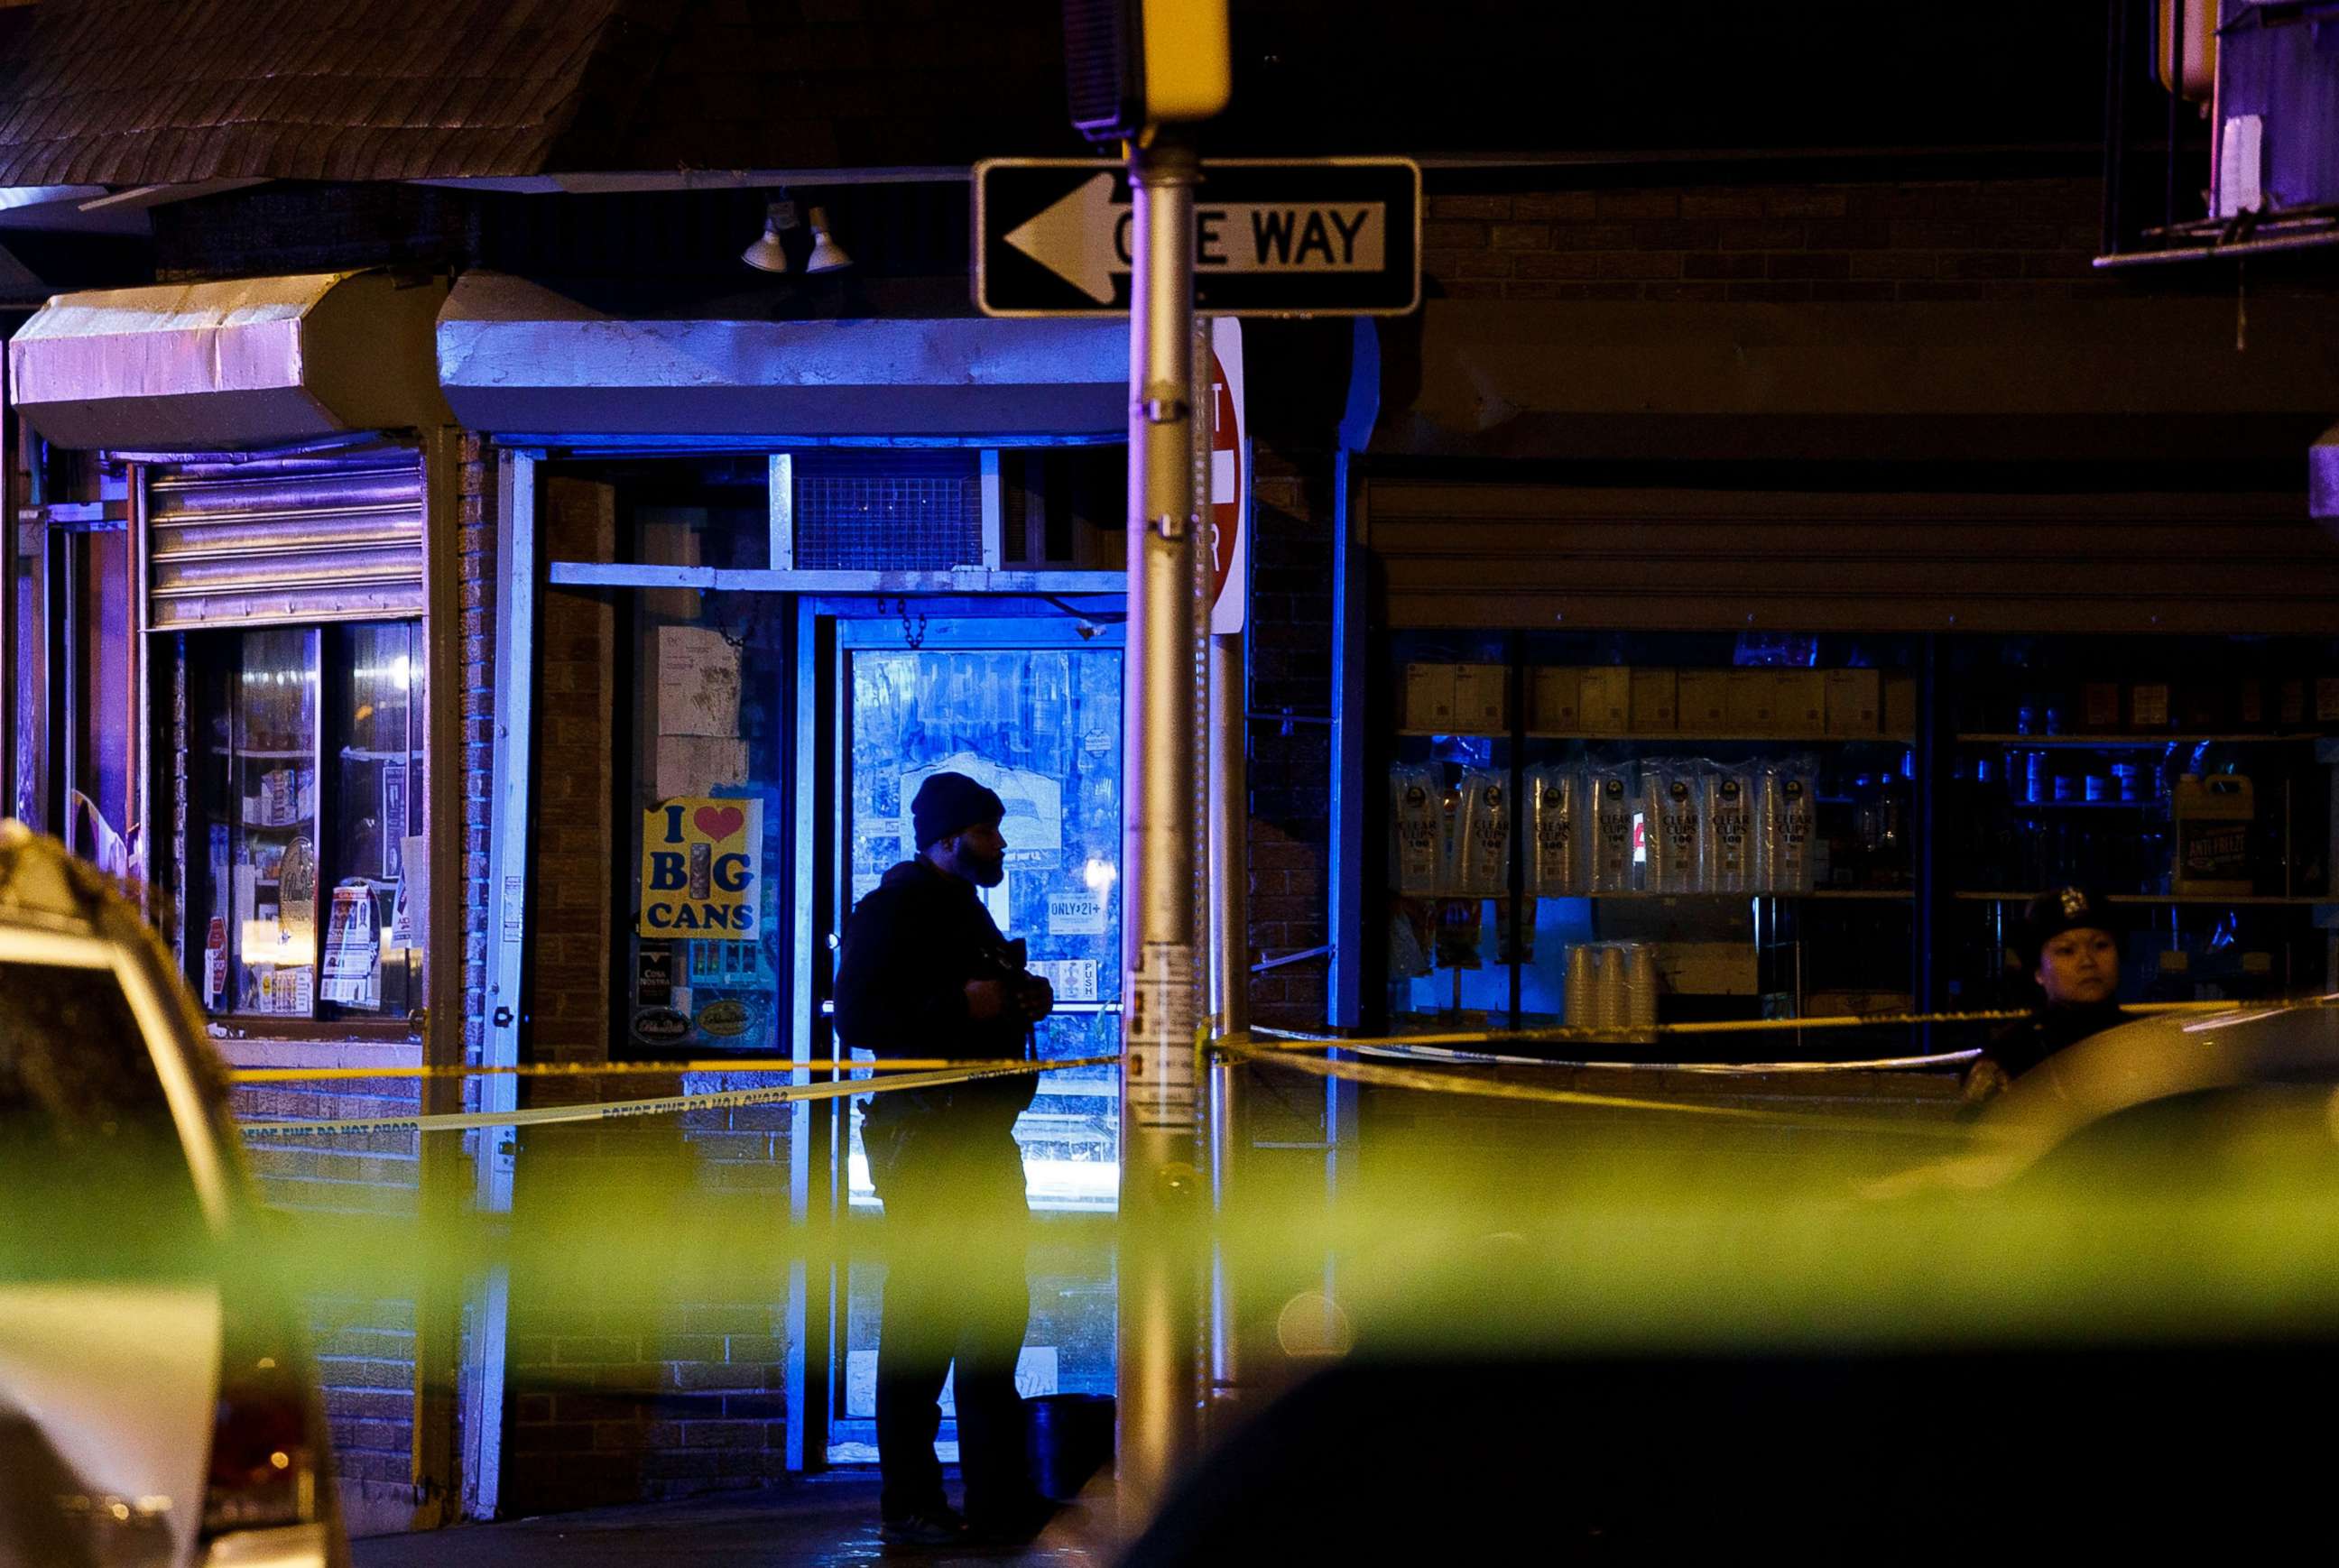 PHOTO: Police secure and investigate the scene of a shooting in Jersey City, N.J., Dec. 10, 2019.